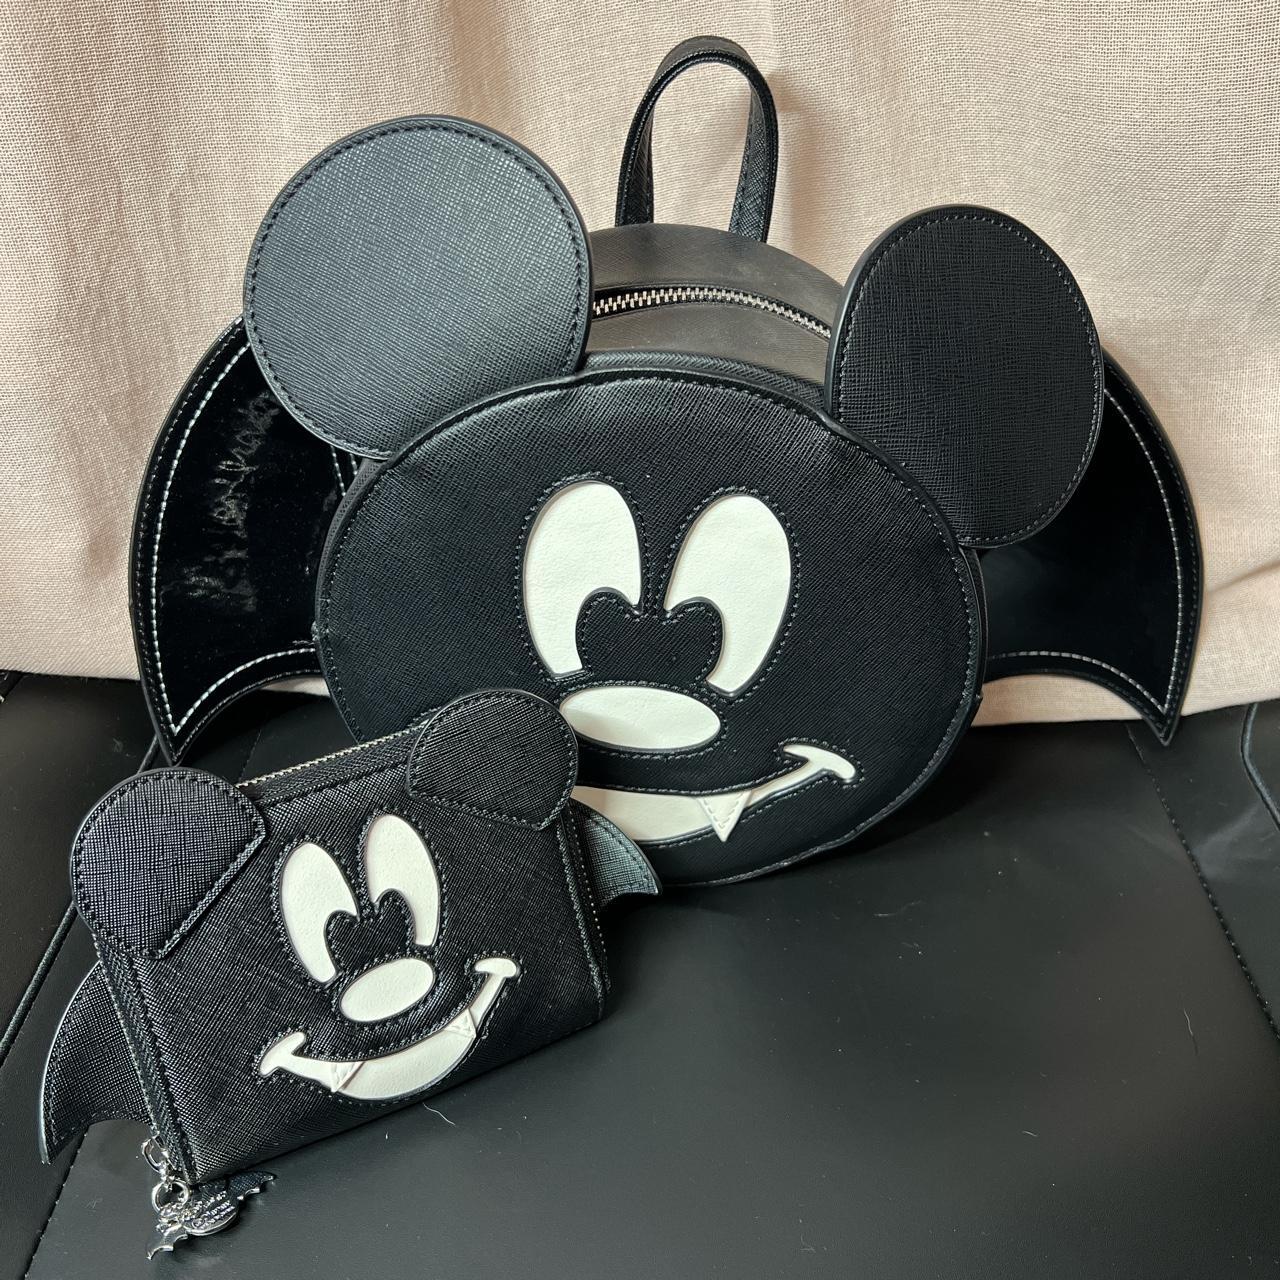 We LOVE these #Disney accessories! #MickeyMouse bags from only £9/€12 # Primark #handbags | Disney bag, Disney purse, Bags